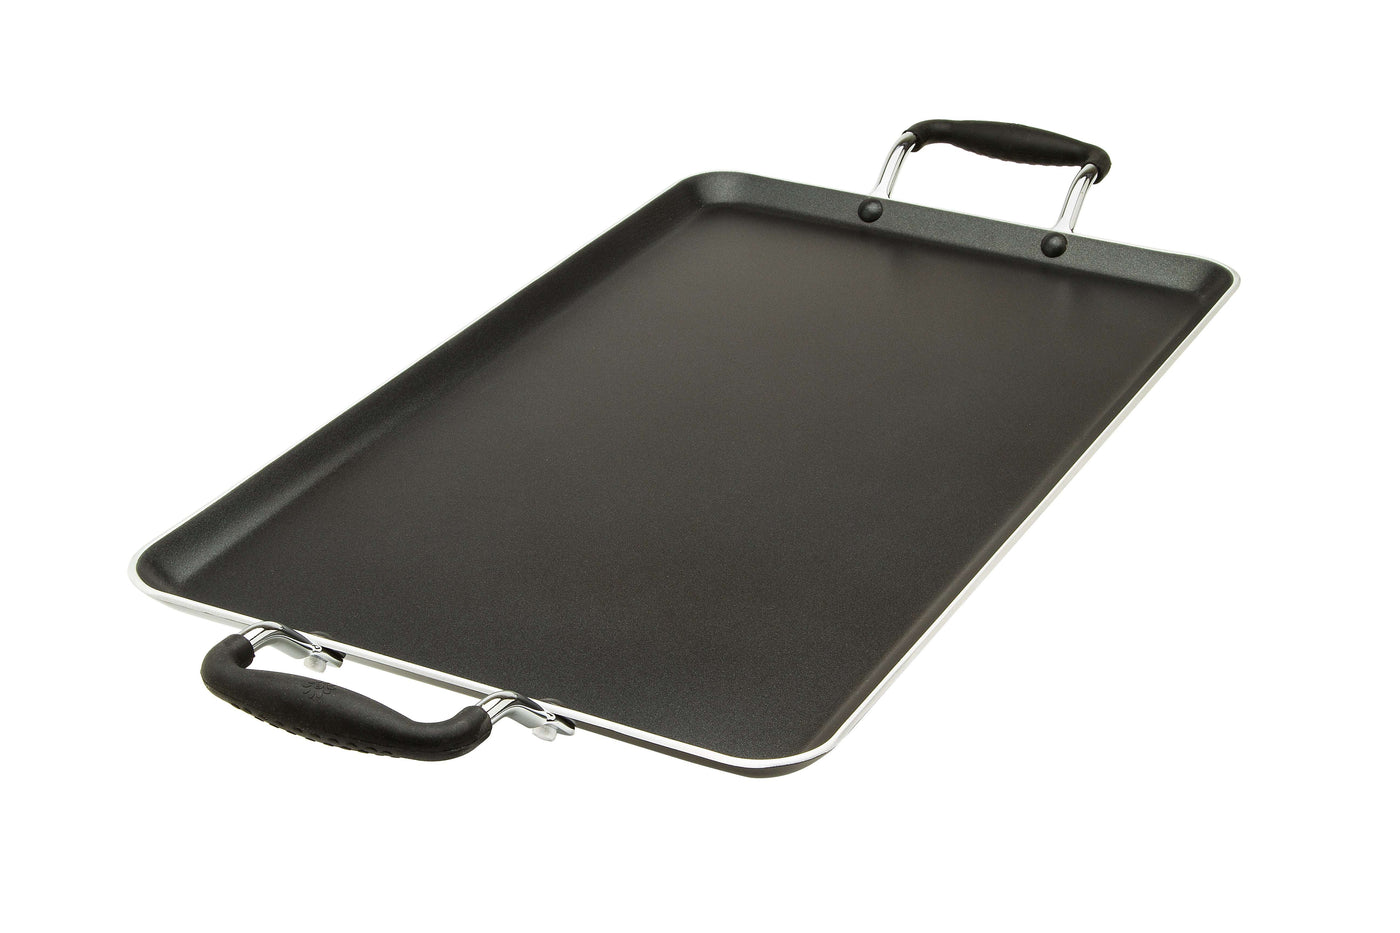 IMUSA Nonstick Double Burner Griddle with Metal Handles 18 inch, Black